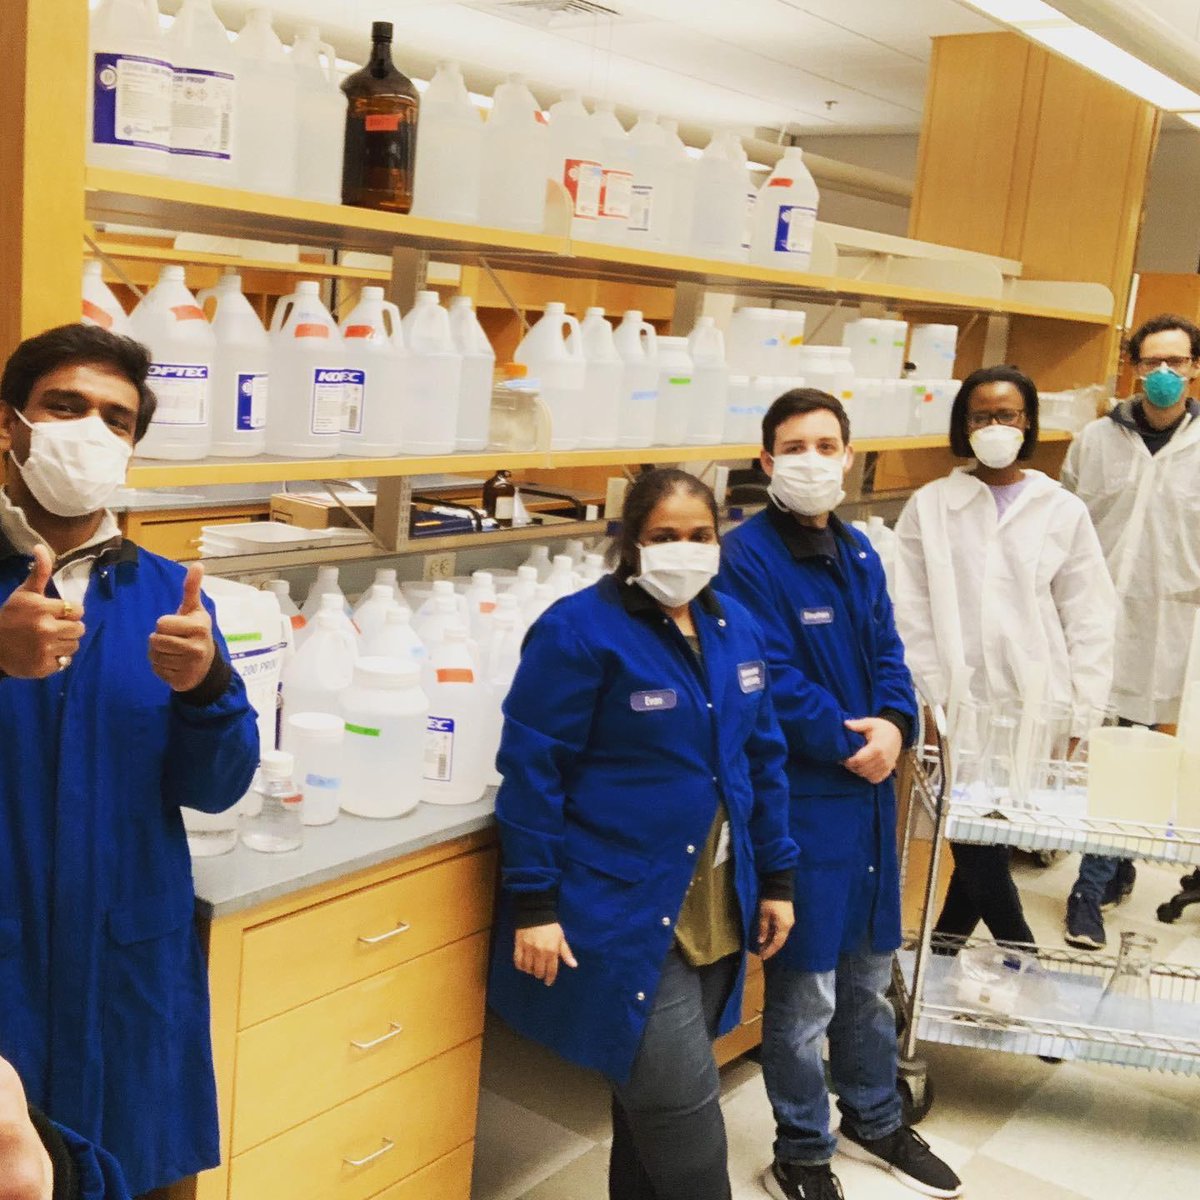 Thanks to  @UMassMedical labs for your reagent donations. Our  @GSBS_UMassMed student team made 150 gallons of hand sanitizer for clinical sites! Shout out to supervisor  @PPooja1986 and advisor Nick Rhind. cc:  @UMassMedRTI